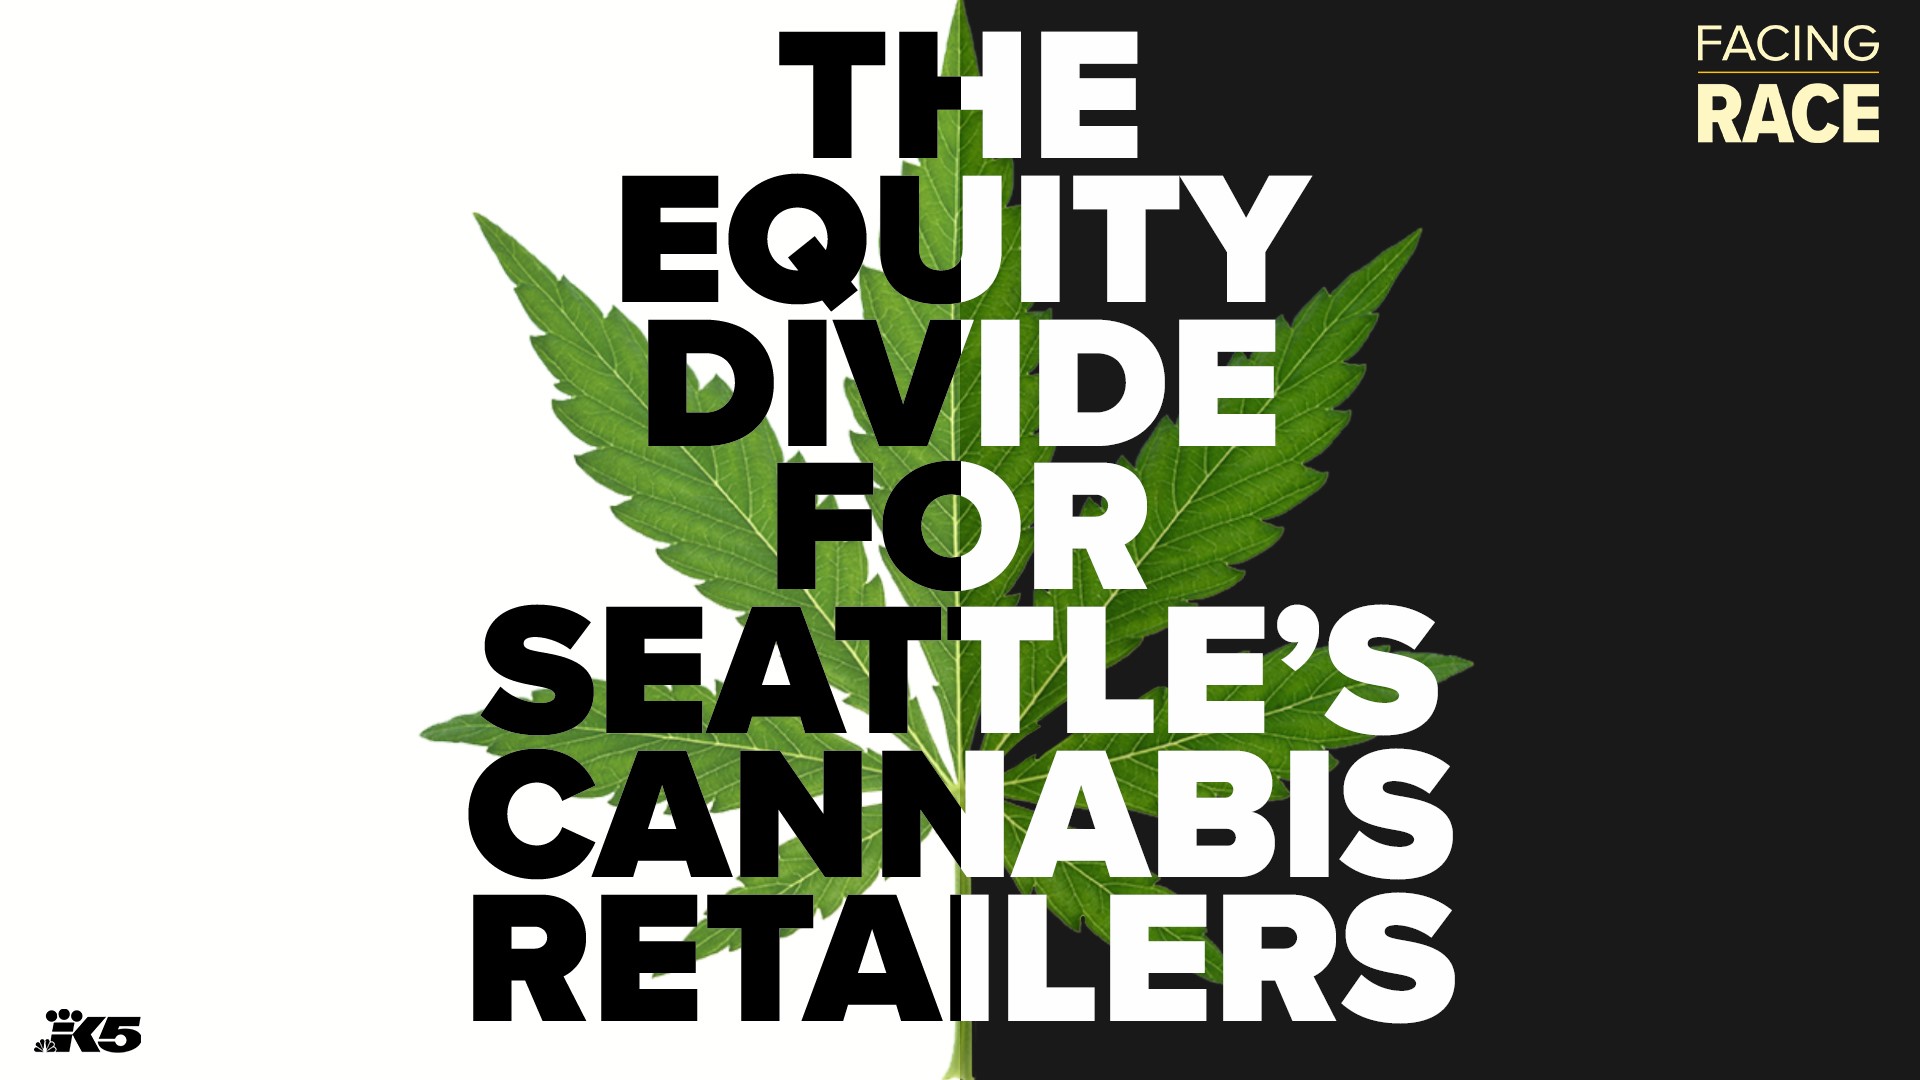 There are no majority Black-owned cannabis retailers in the city of Seattle. Now there's a push underway to change that.